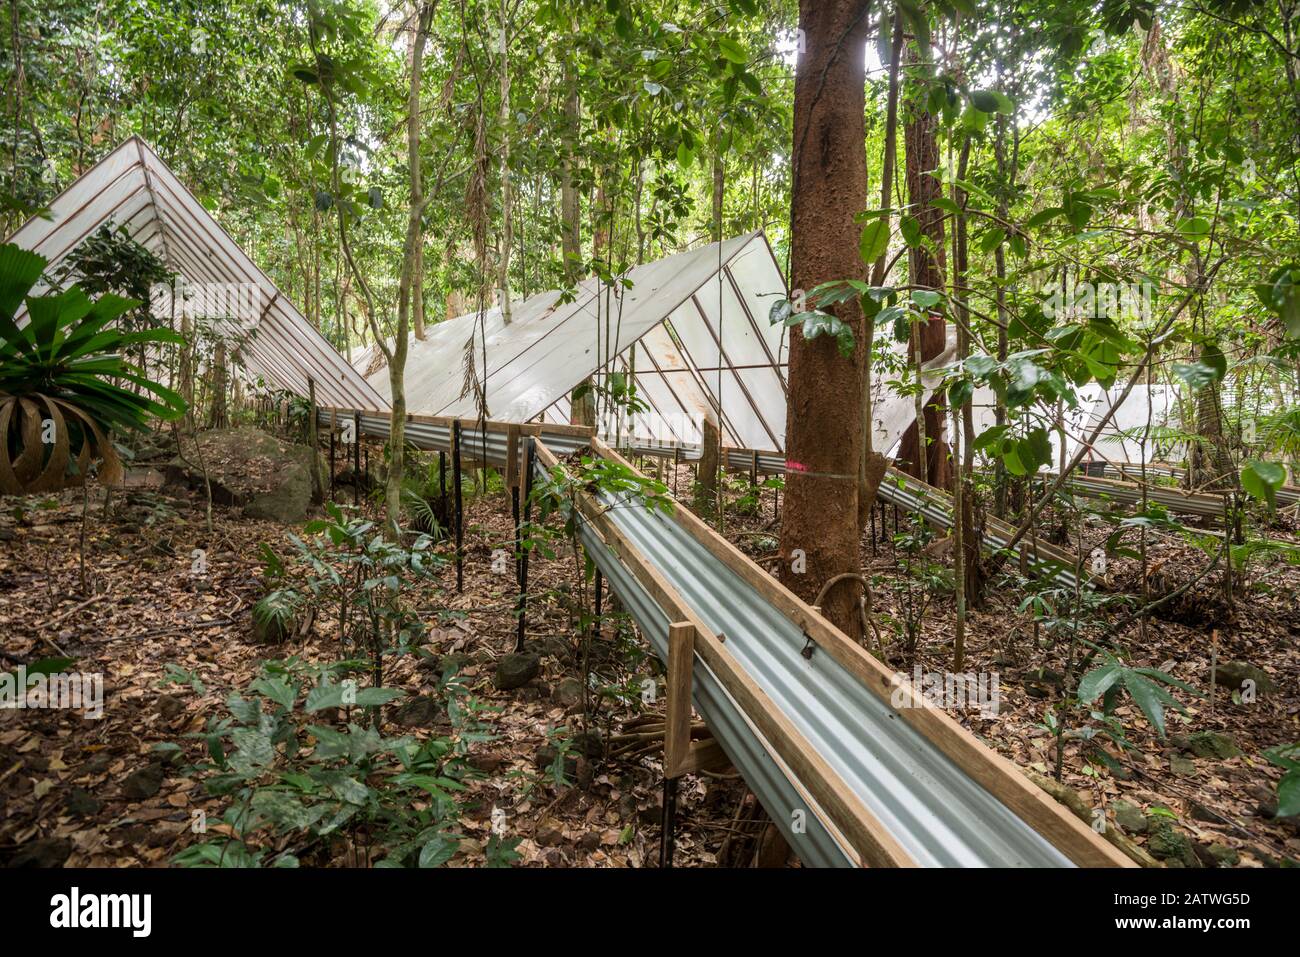 Guttering to redirect water at the Daintree Drought Experiment, where rainforest plants grown under cover to see how they respond to drought. Daintree Rainforest Observatory, northern Queensland, Australia. September 2015 Stock Photo